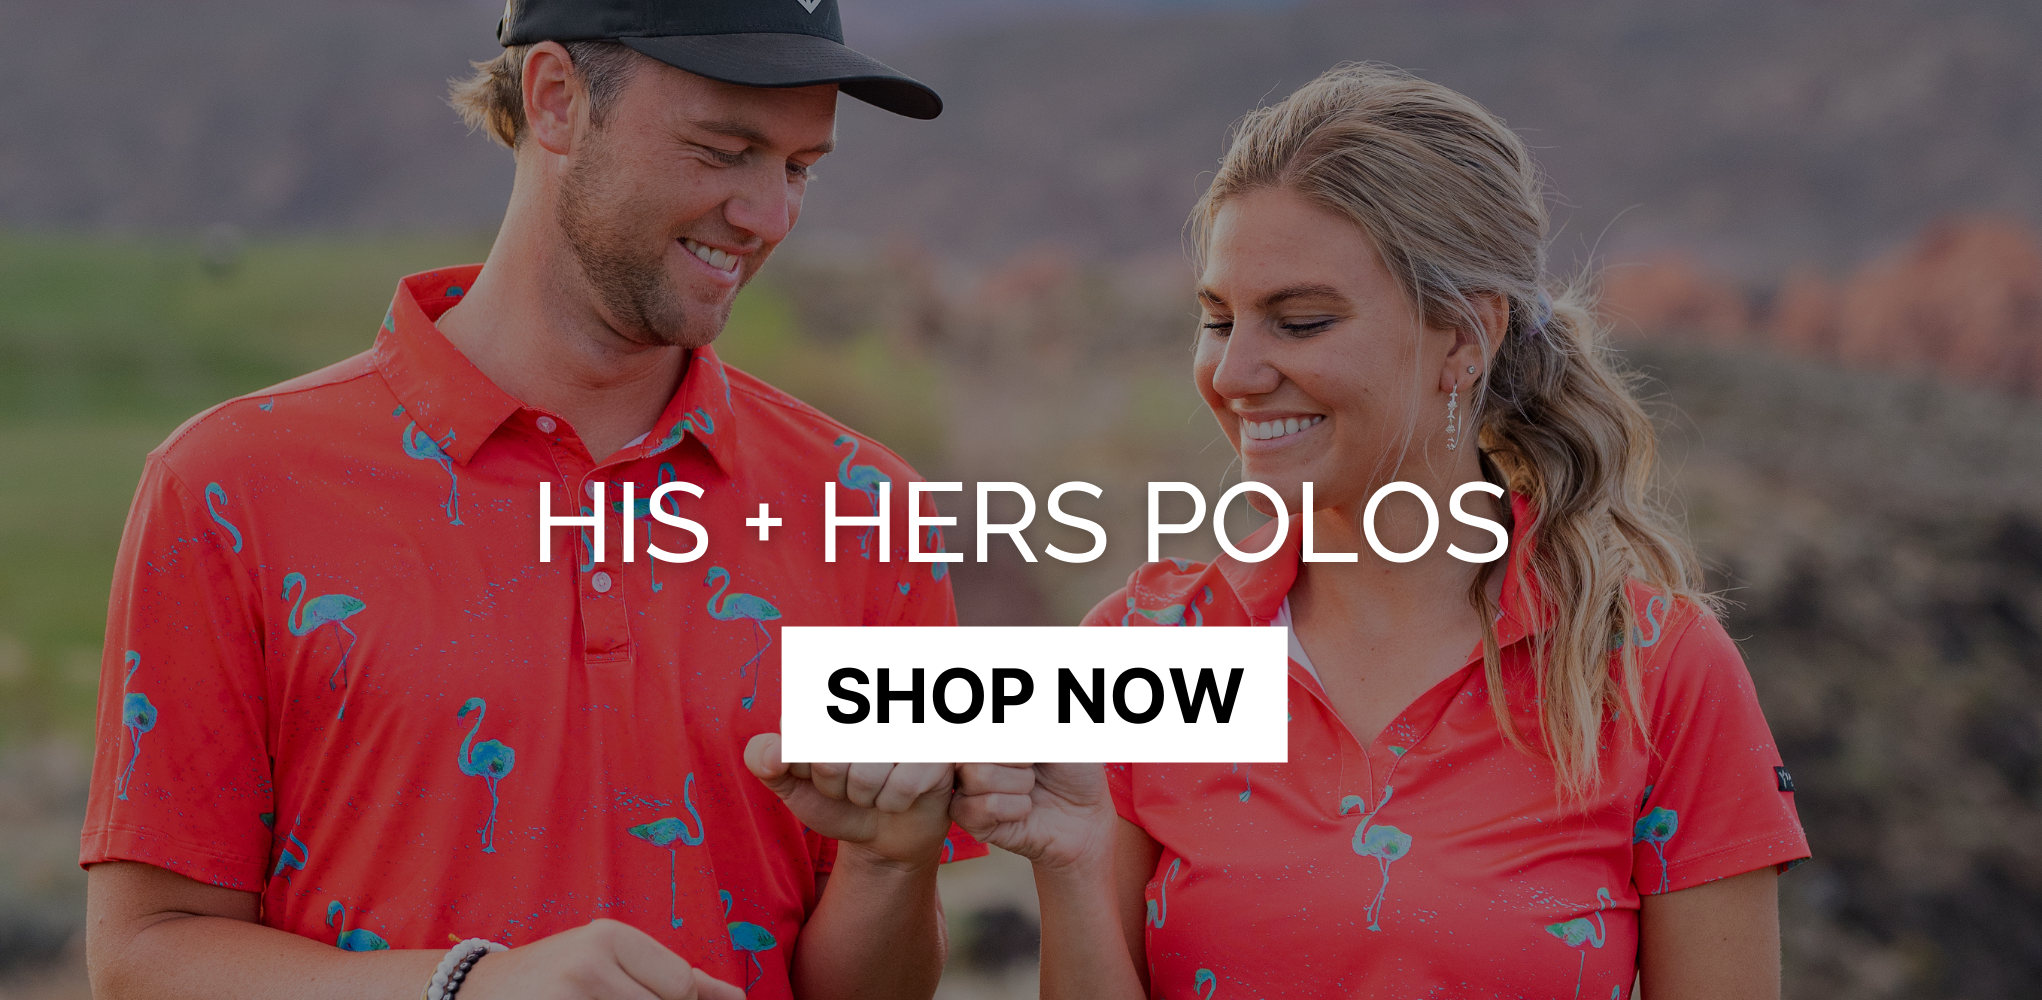 Shop His+Hers Golf Polos Button With Man & Woman Wearing Flamingo Golf Polos In Background